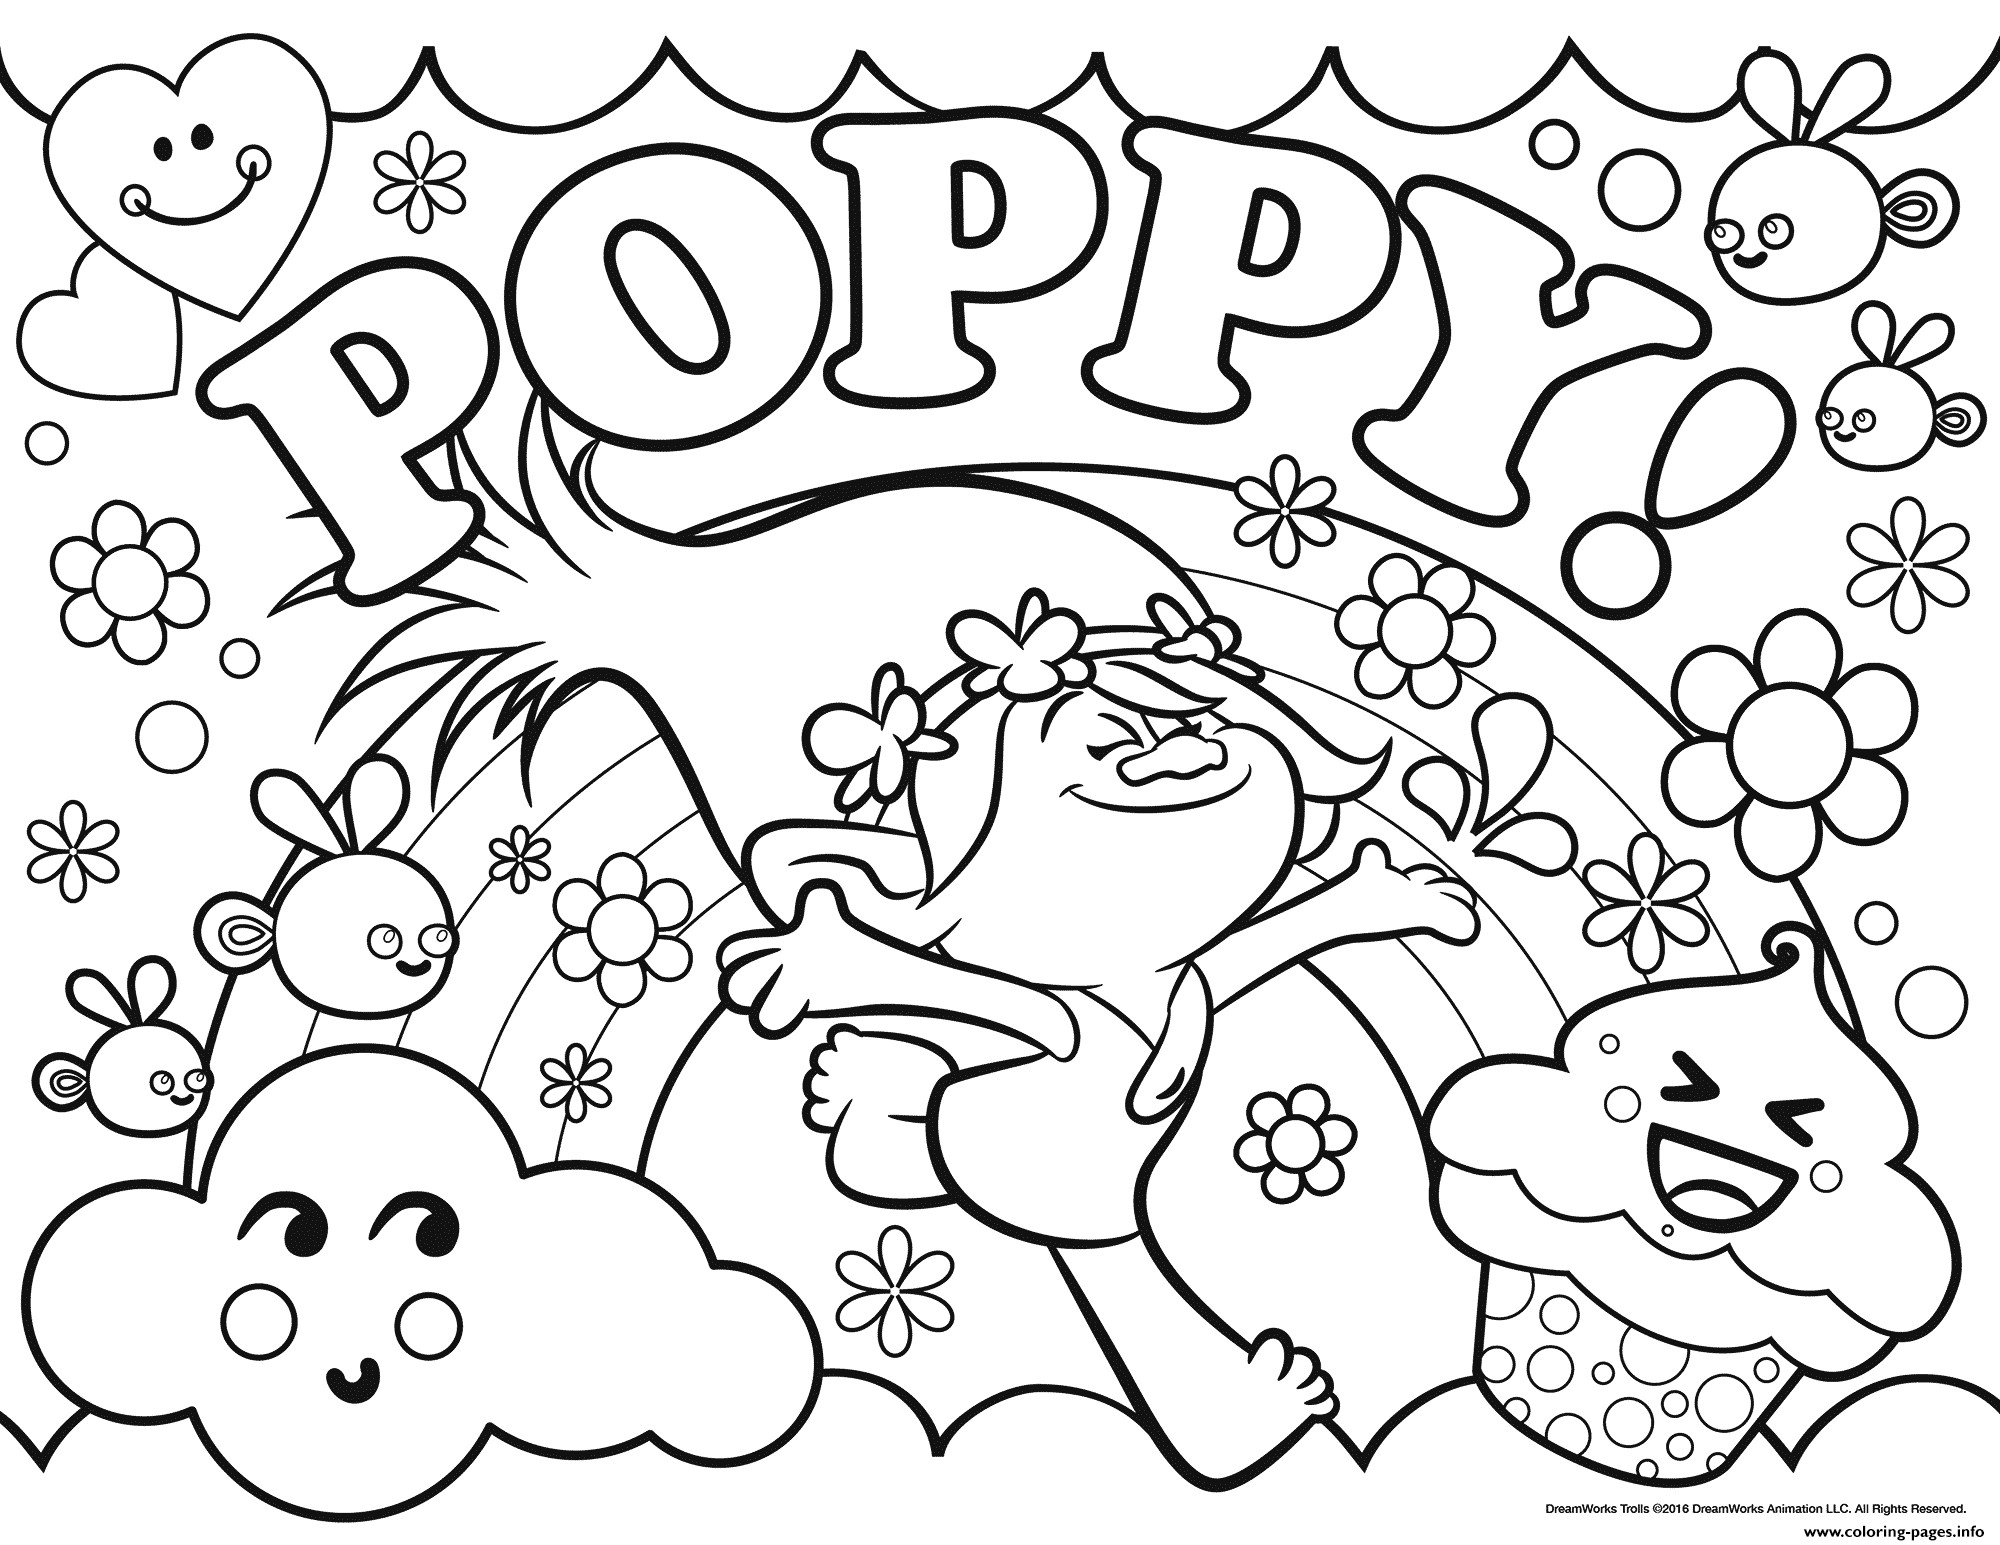 Trolls Coloring Pages Birthday Wallpaper